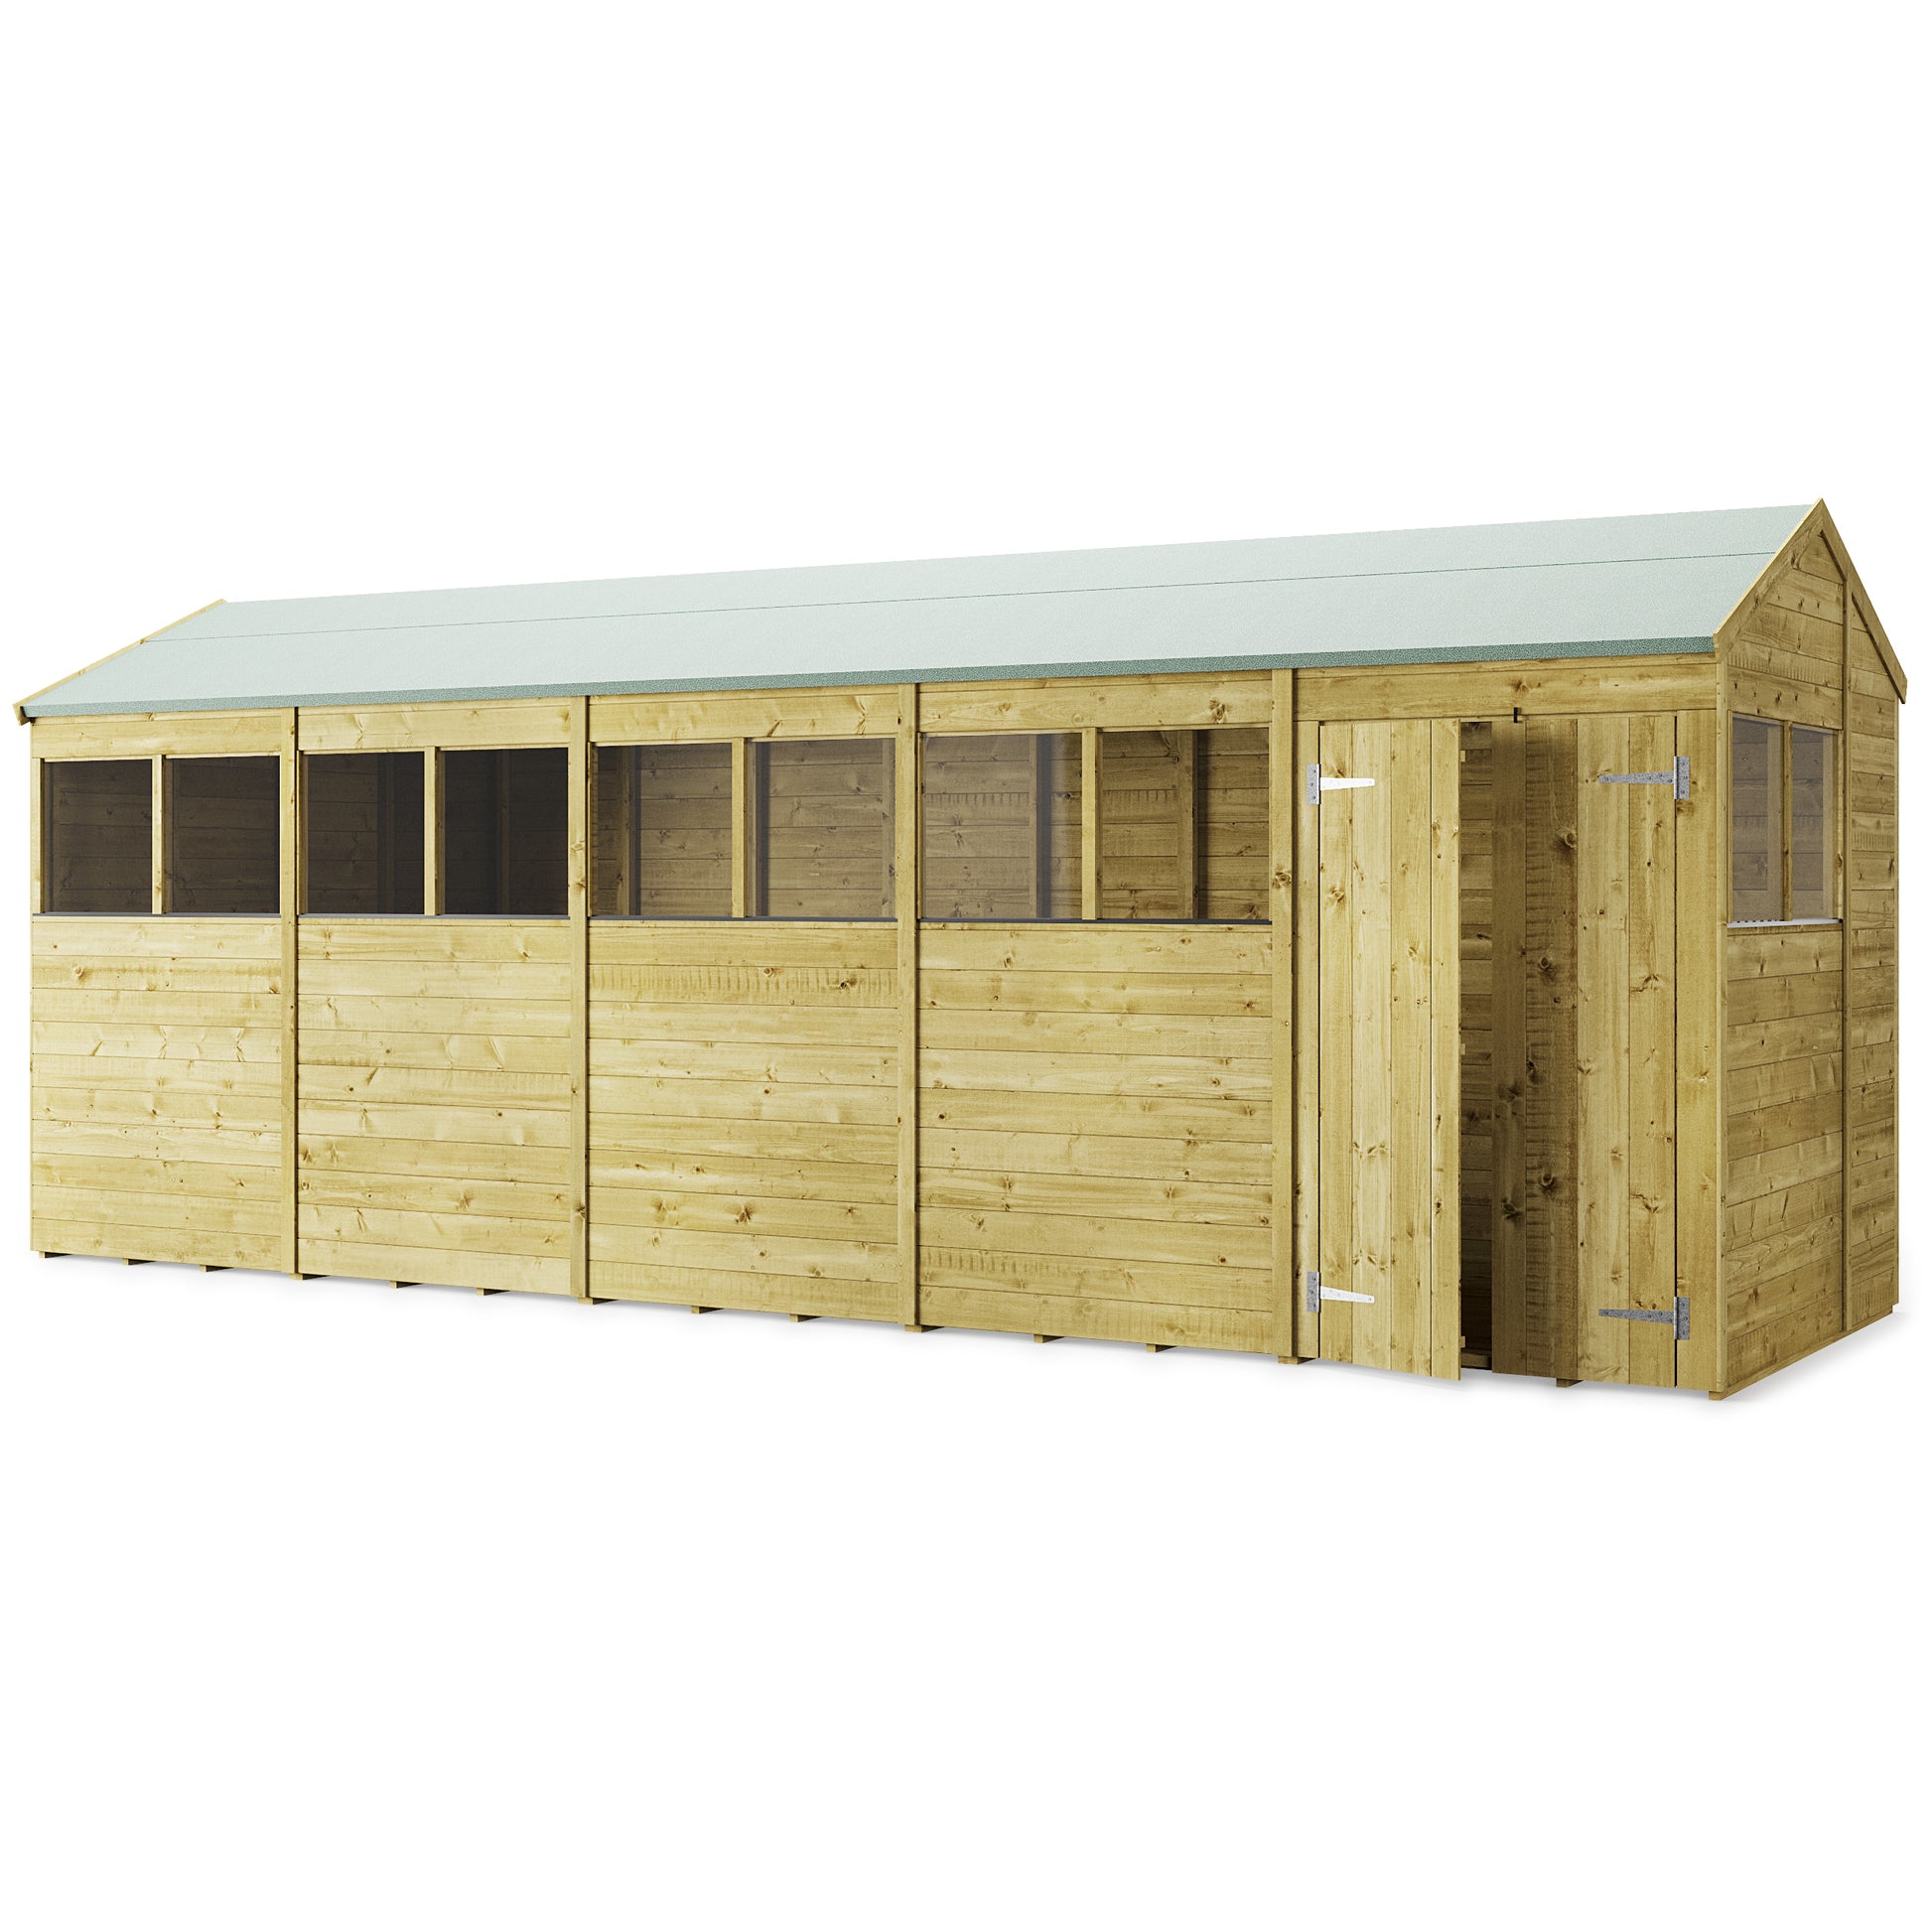 Store More 20 x 6 Tongue and Groove Apex Shed Windowed - Premium Garden